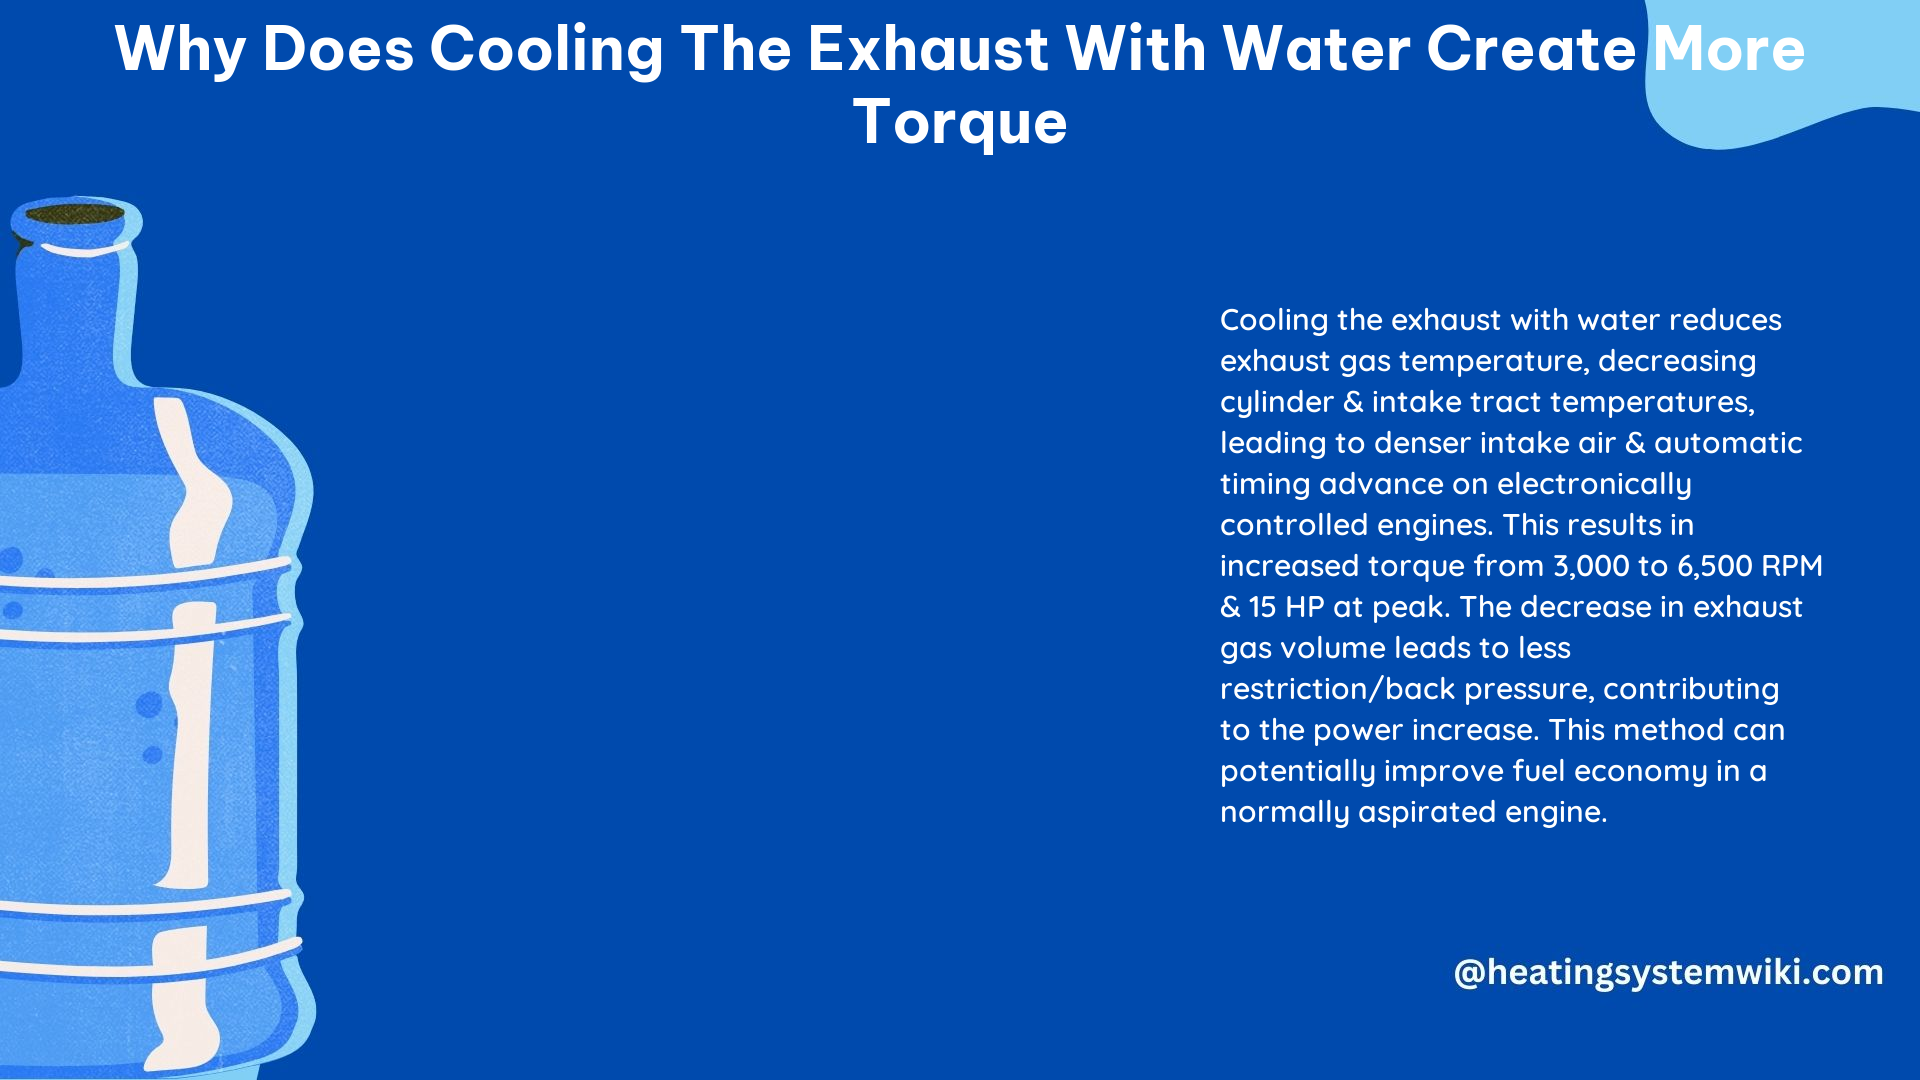 Why Does Cooling the Exhaust With Water Create More Torque